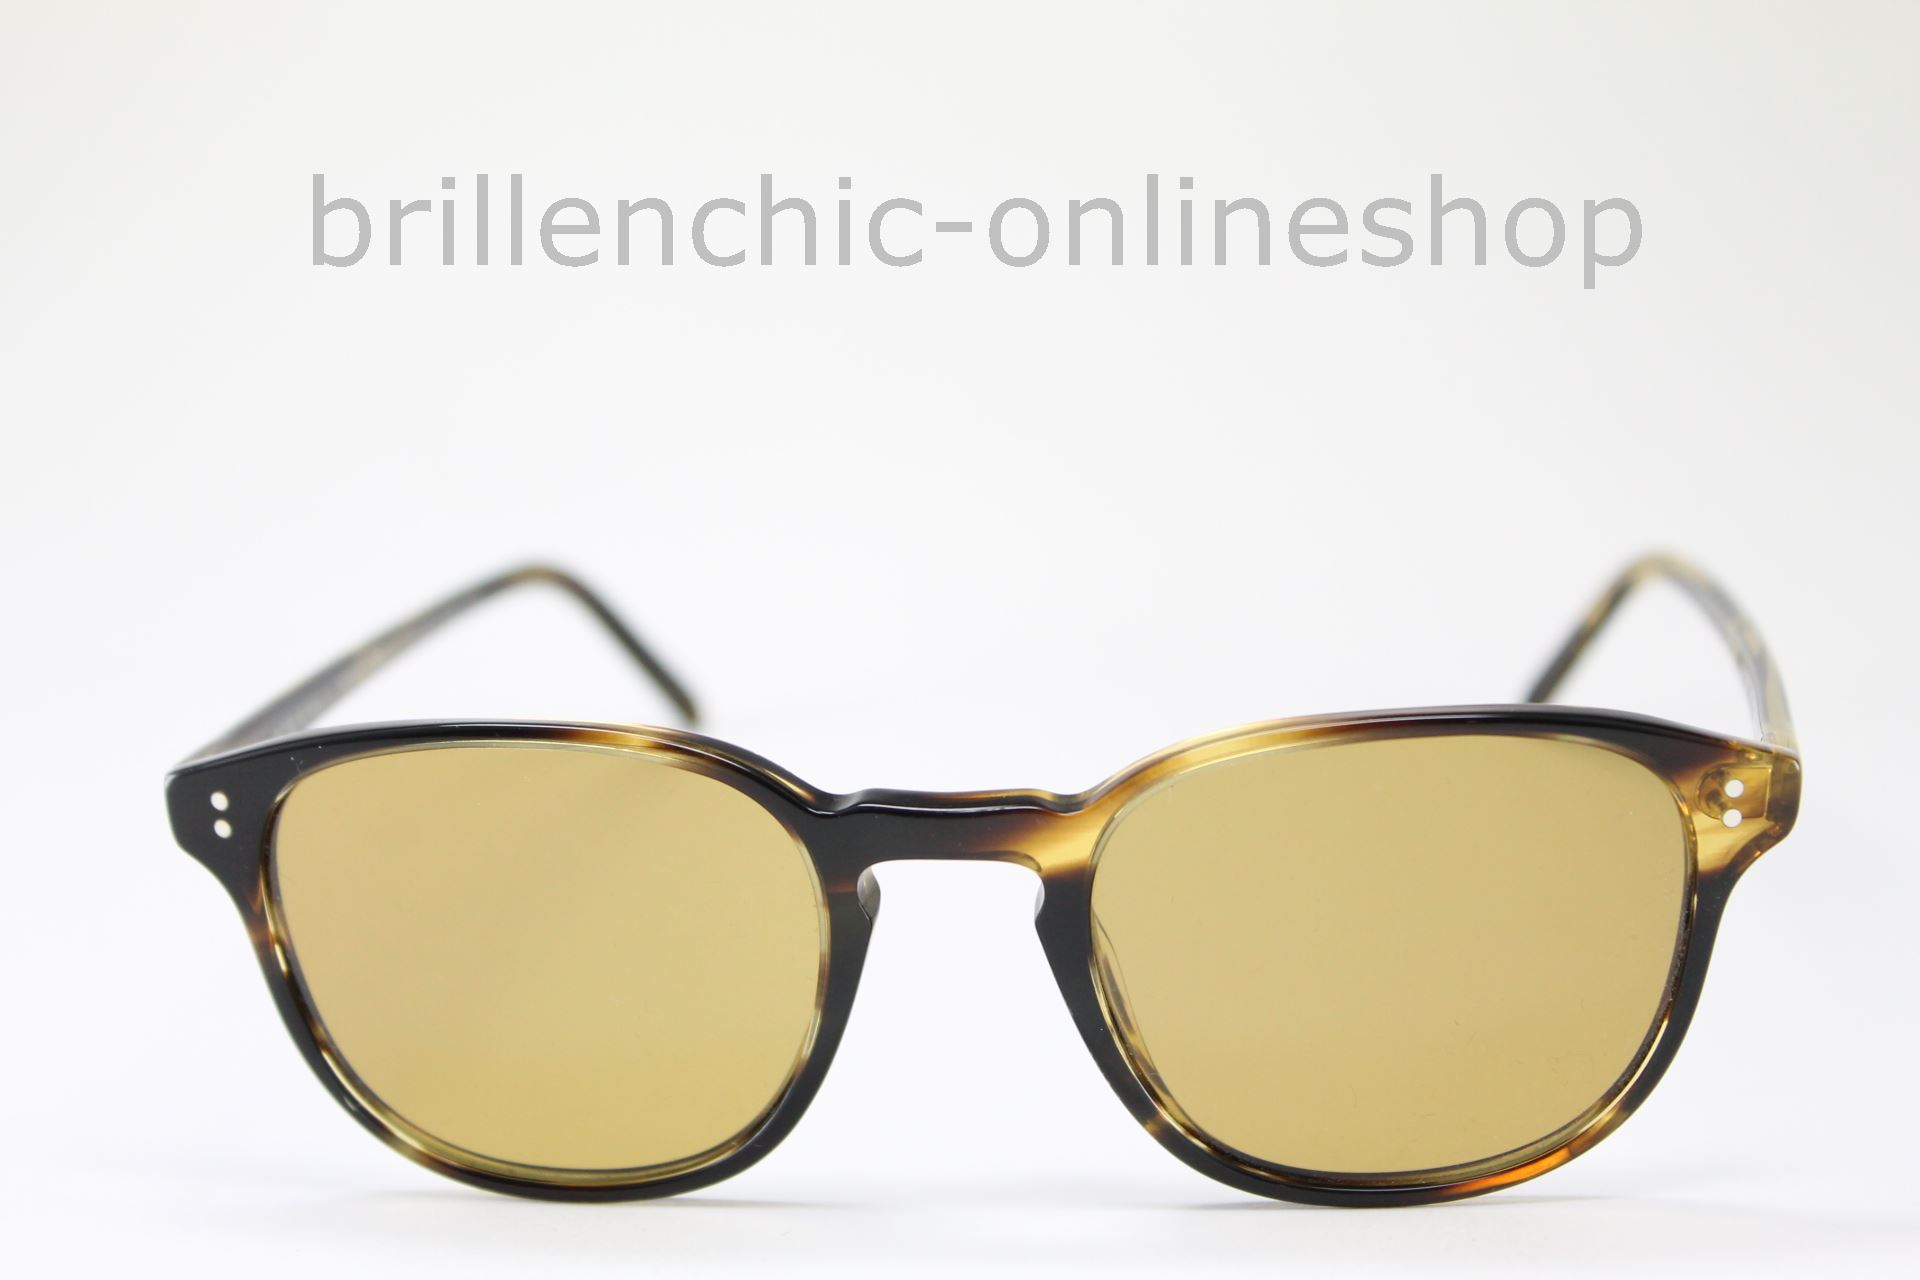 Brillenchic-onlineshop in Berlin - OLIVER PEOPLES FAIRMONT SUN OV 5219S  5219 1003/R9 - PHOTOCROMIC 